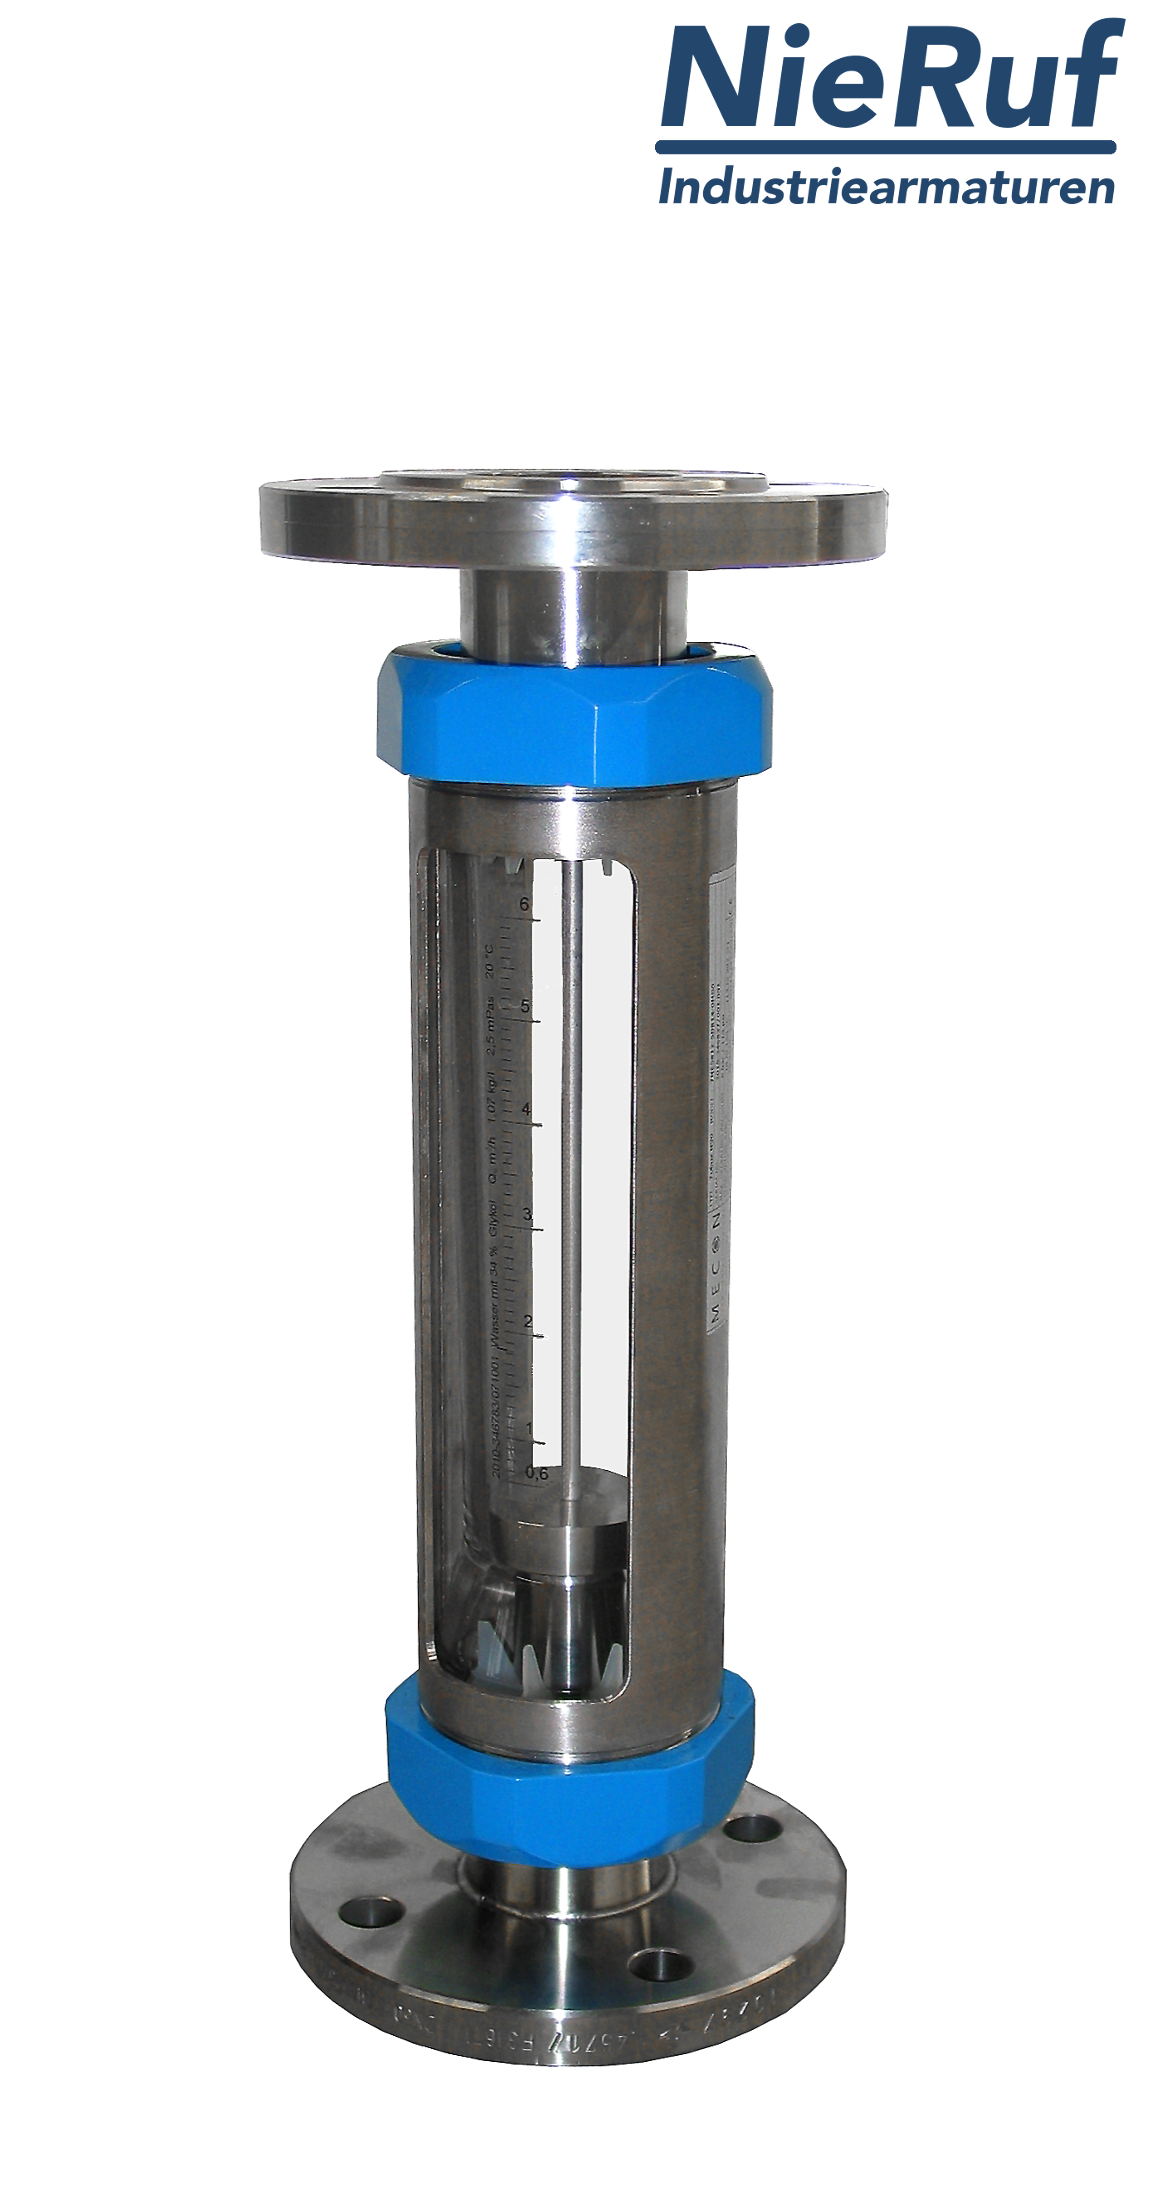 Variable area flowmeter stainless steel + borosilicate flange DN10 5.0 - 50.0 l/h water FKM